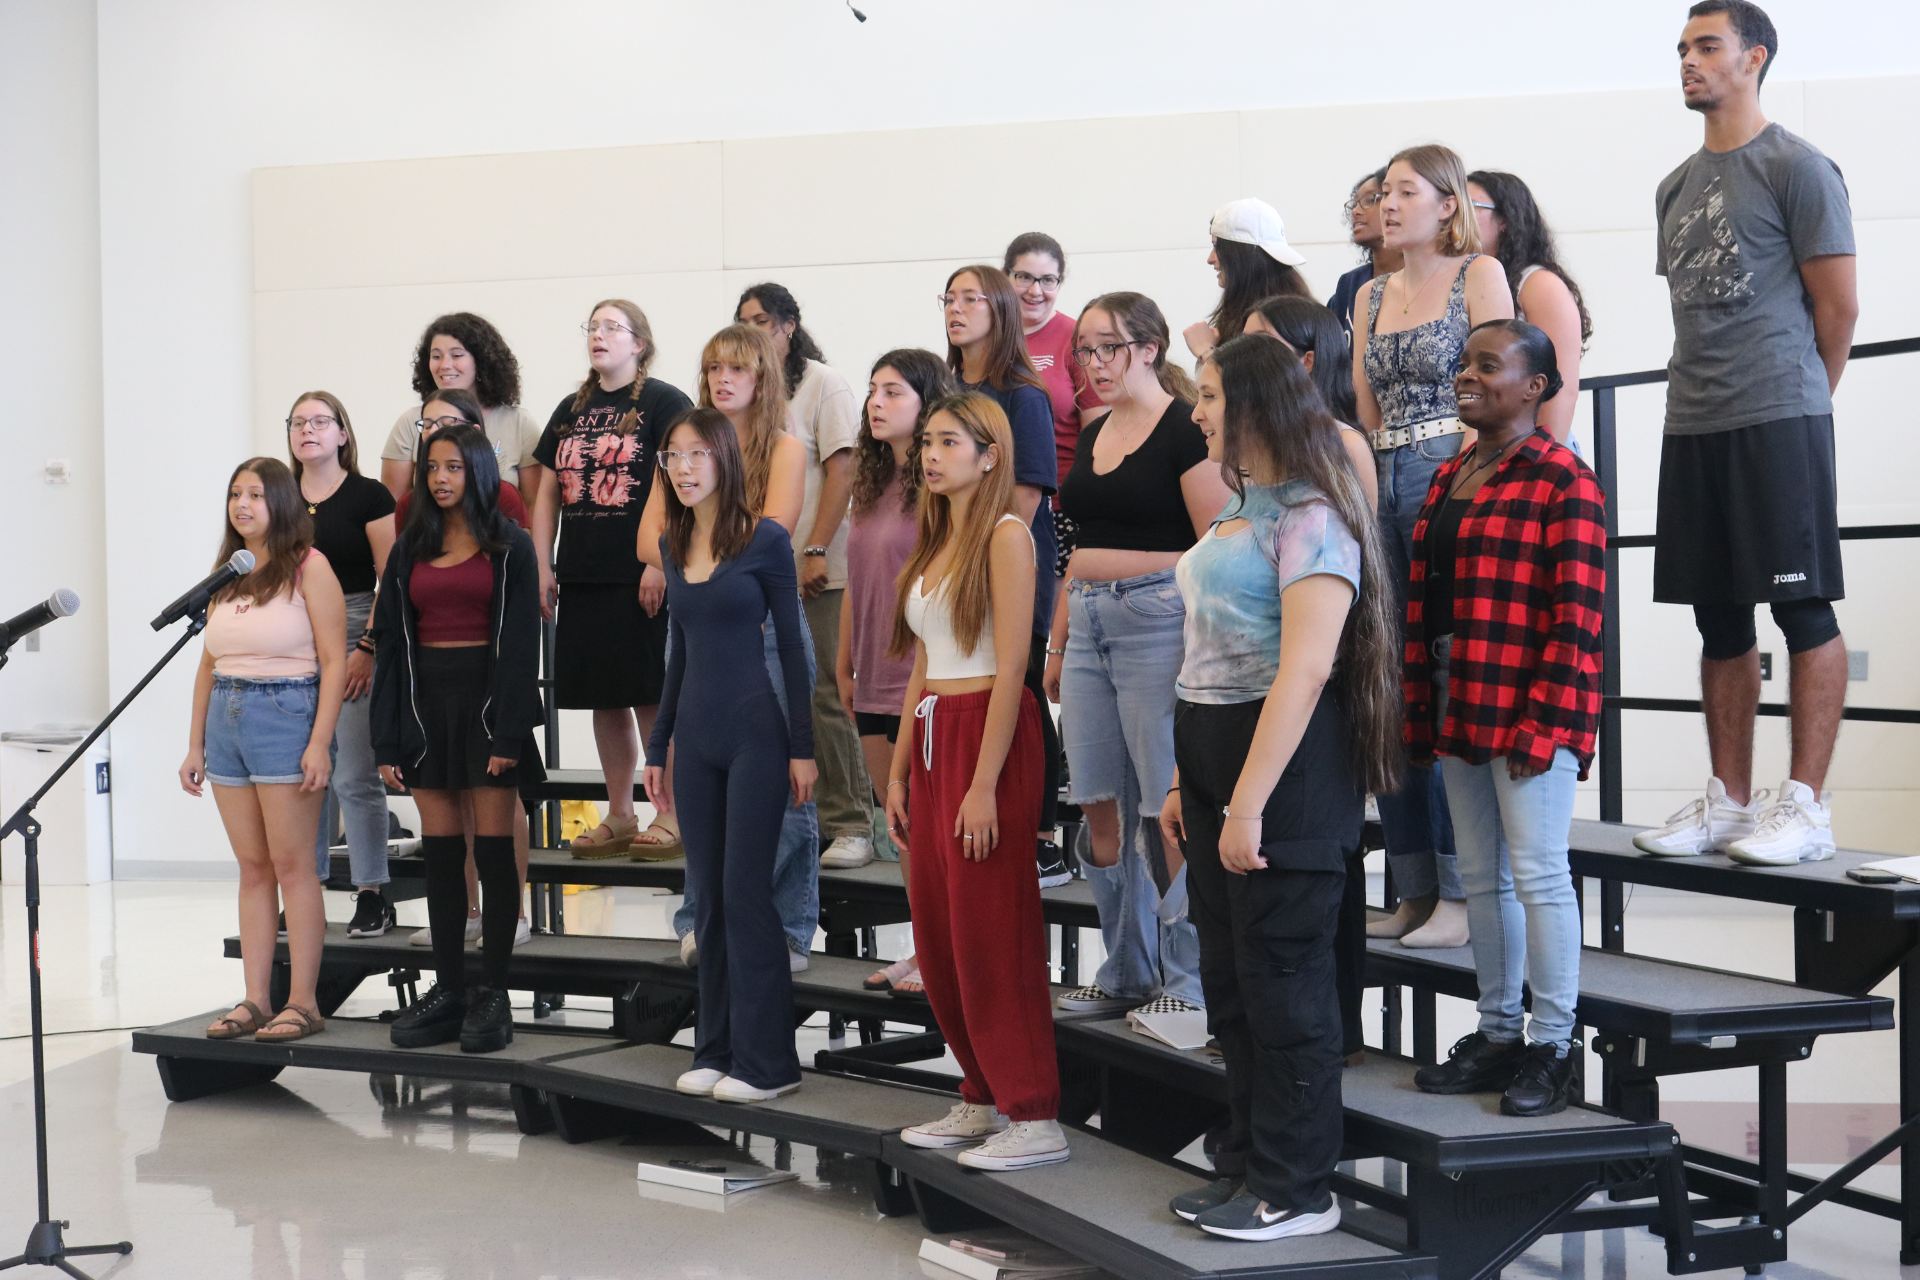 PHOTO BY DANNA BERTELThe Bossa Nova Chorale practices the opening song "A Million Dreams" during rehearsal.